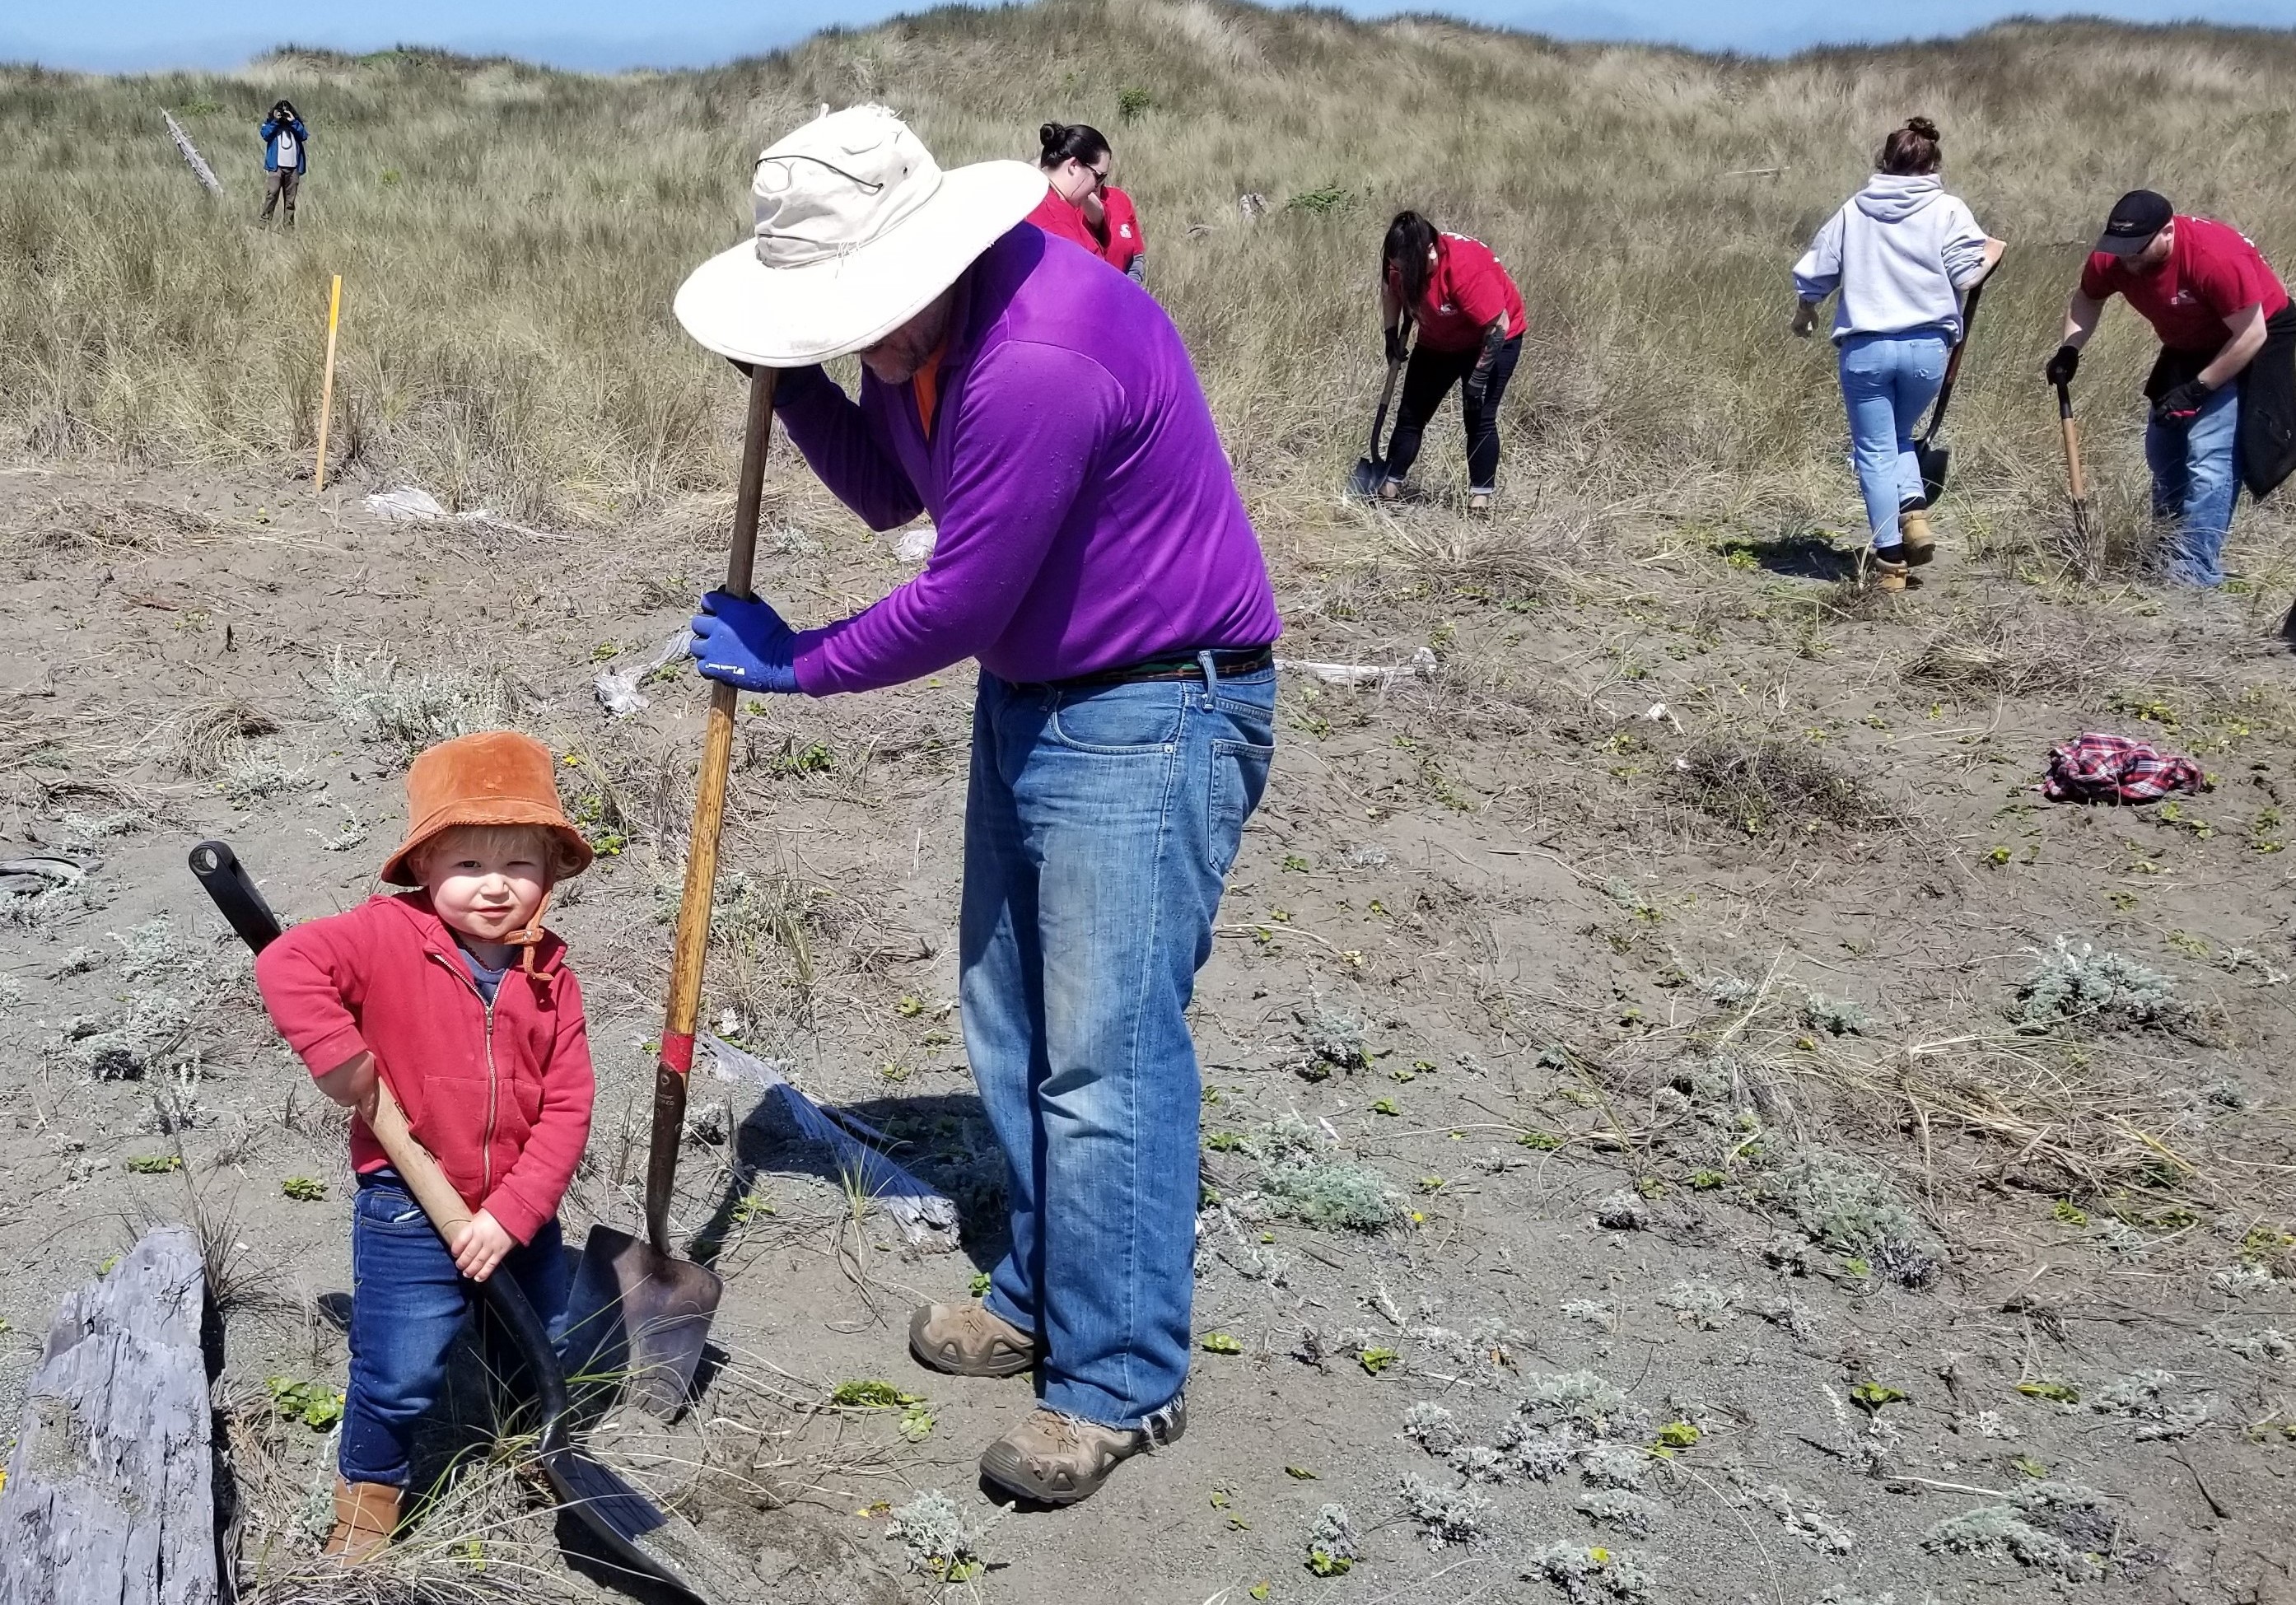 A young child and adult with shovels working in the dunes